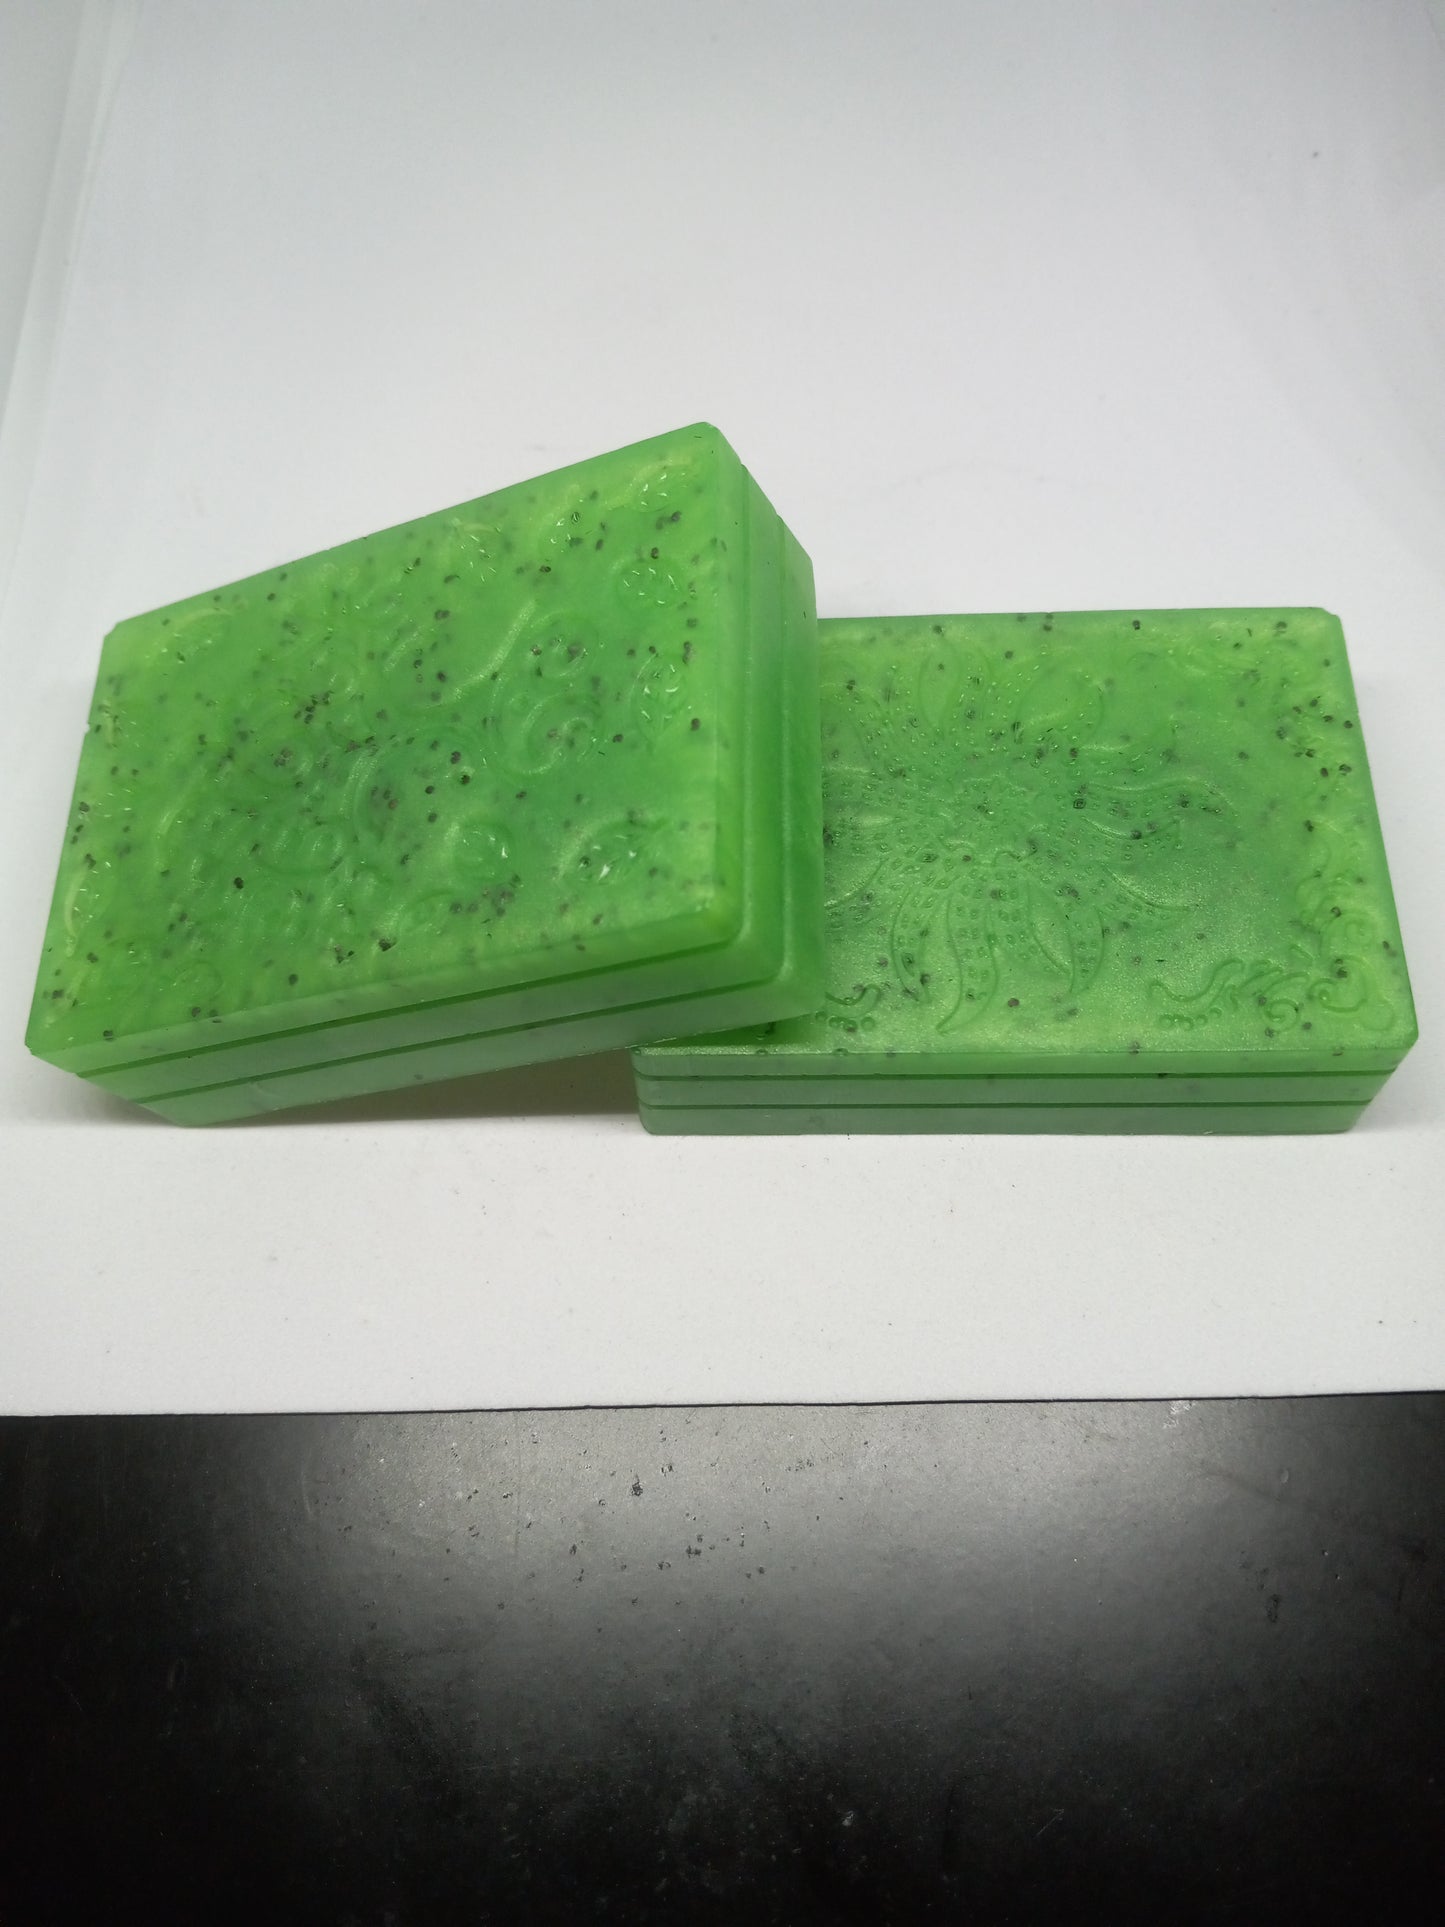 Green Tea and Cucumber - Hand Poured Exfoliating Olive Oil / Hemp Seed Oil Soap